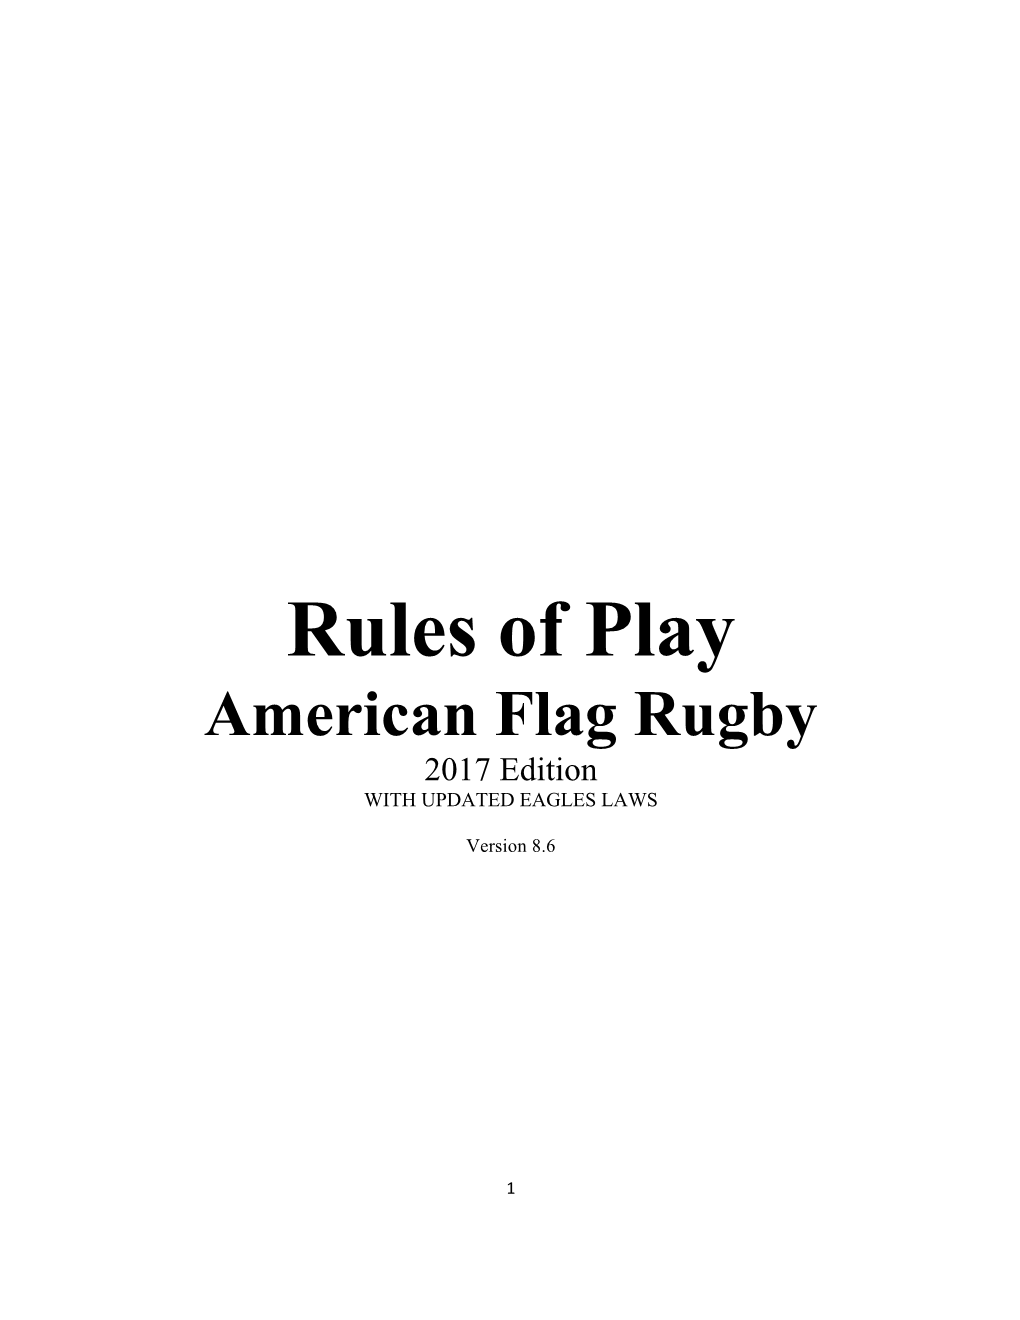 Rules of Play American Flag Rugby 2017 Edition with UPDATED EAGLES LAWS